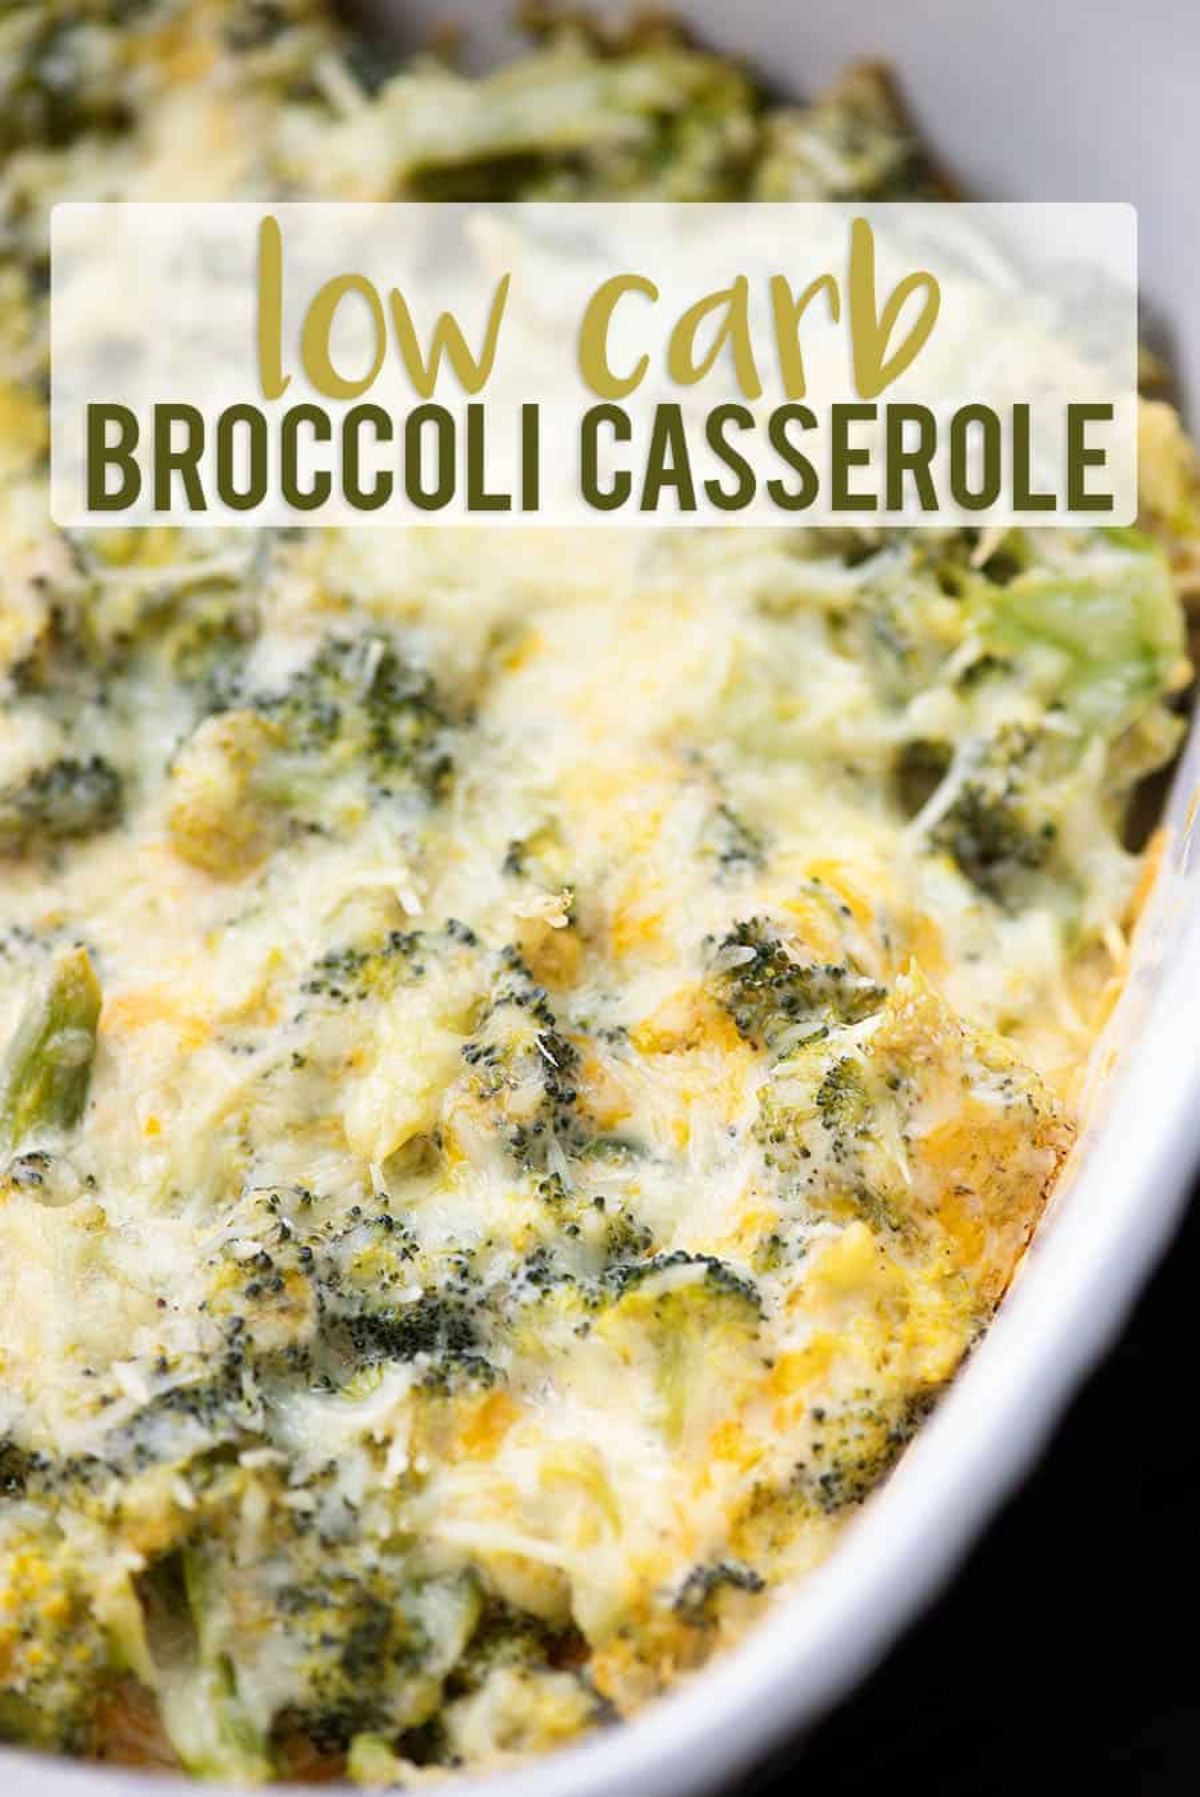 The text reads "Low Carb broccoli casserole" The photo is a partial shot of a white casserole dish filled with cheesy broccoli casserole